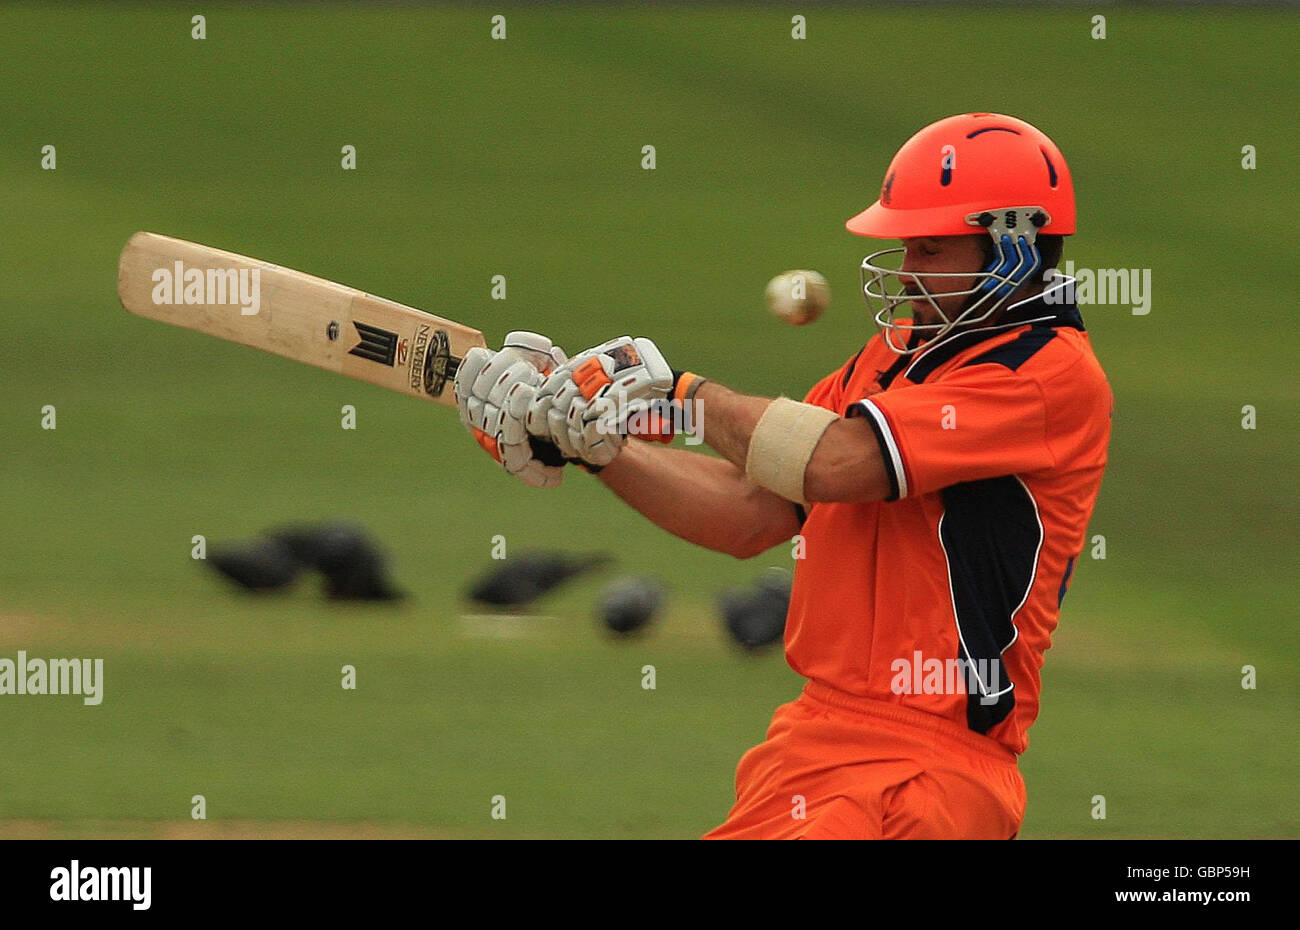 Netherland's Bas Zuiderent trys to hook the ball away from his helmet grill during the Twenty20 World Cup warm up match at The Brit Oval, London, Stock Photo